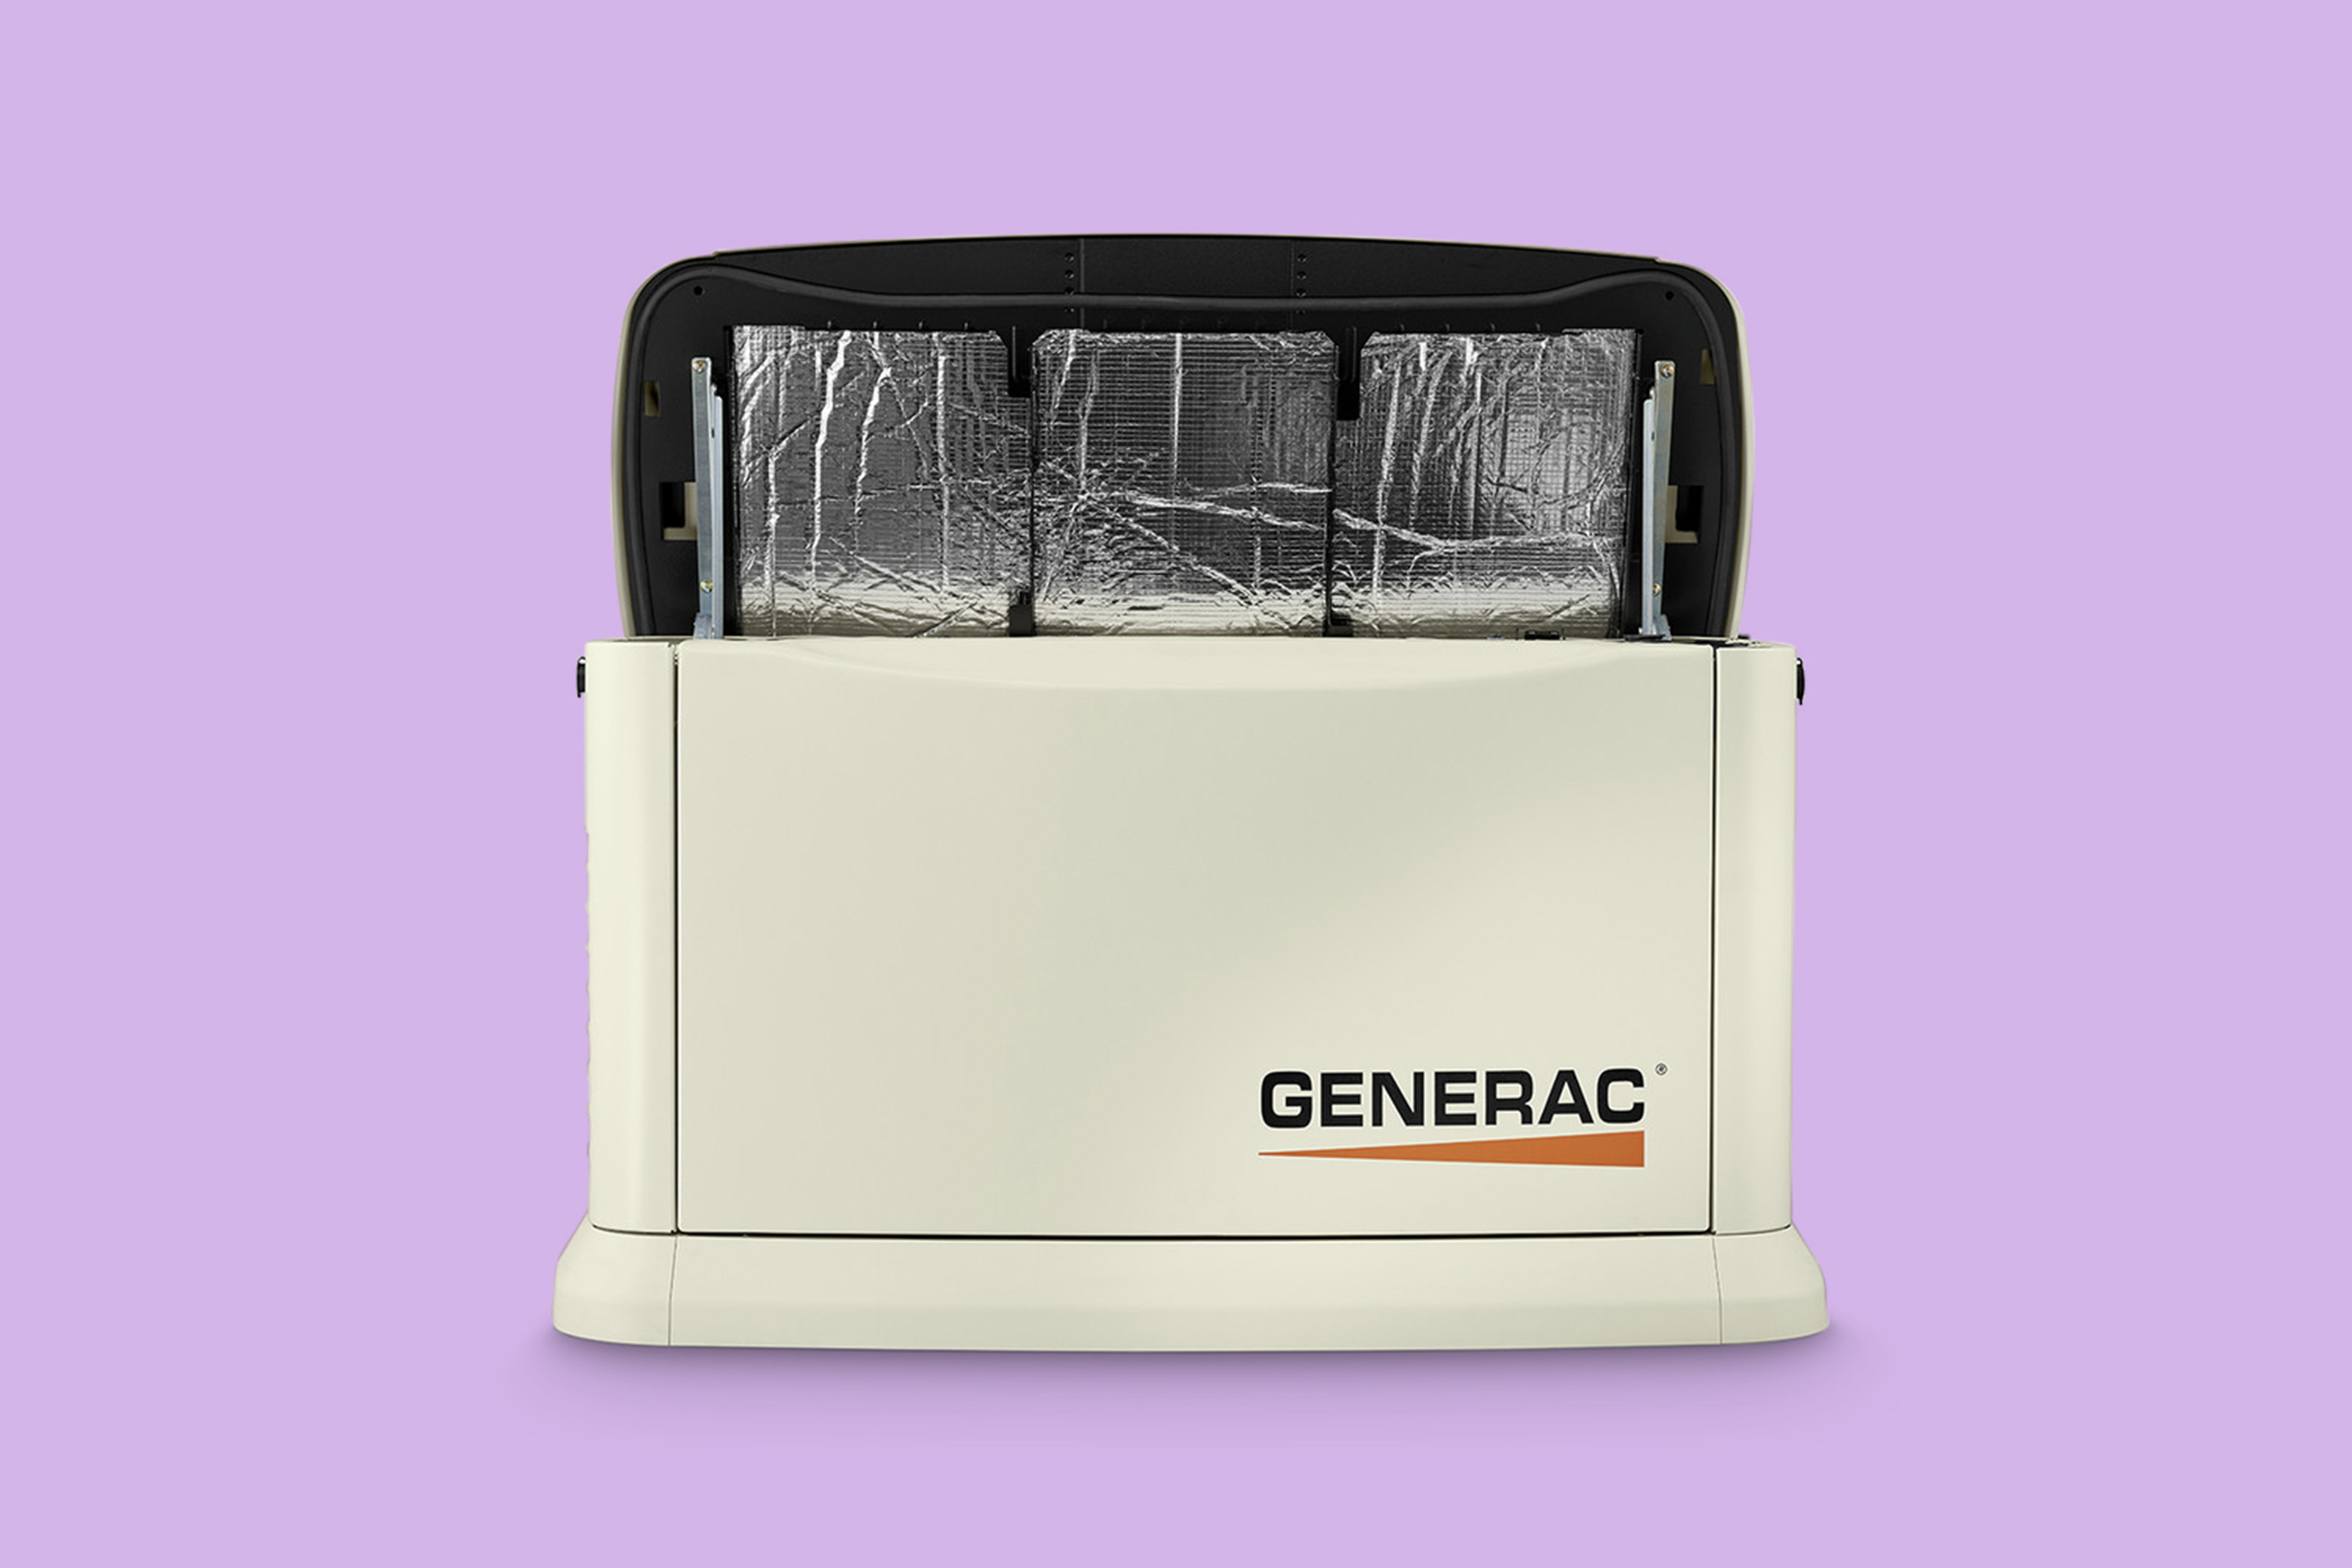 Generac generator in front of a purple background